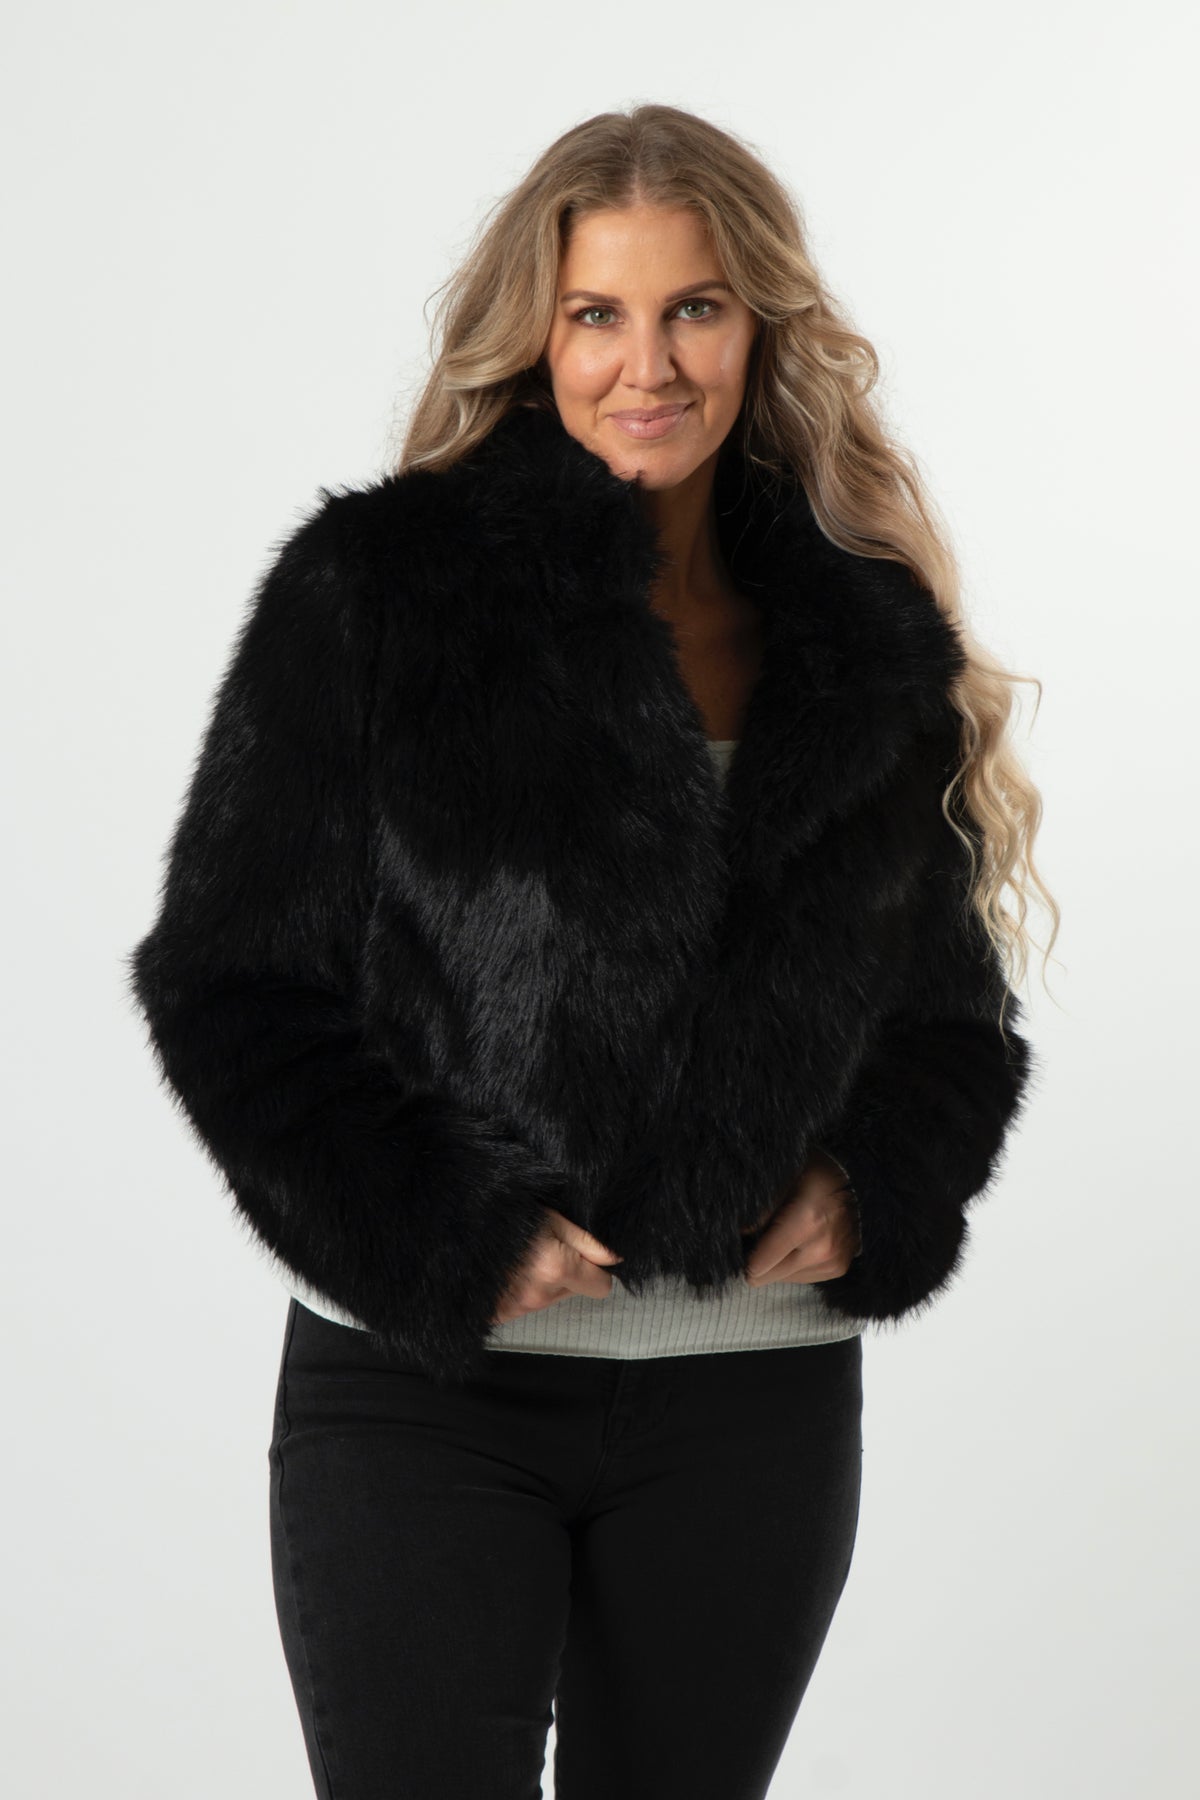 Fur Baby Jacket Black - PREORDER DELIVERY EARLY APRIL